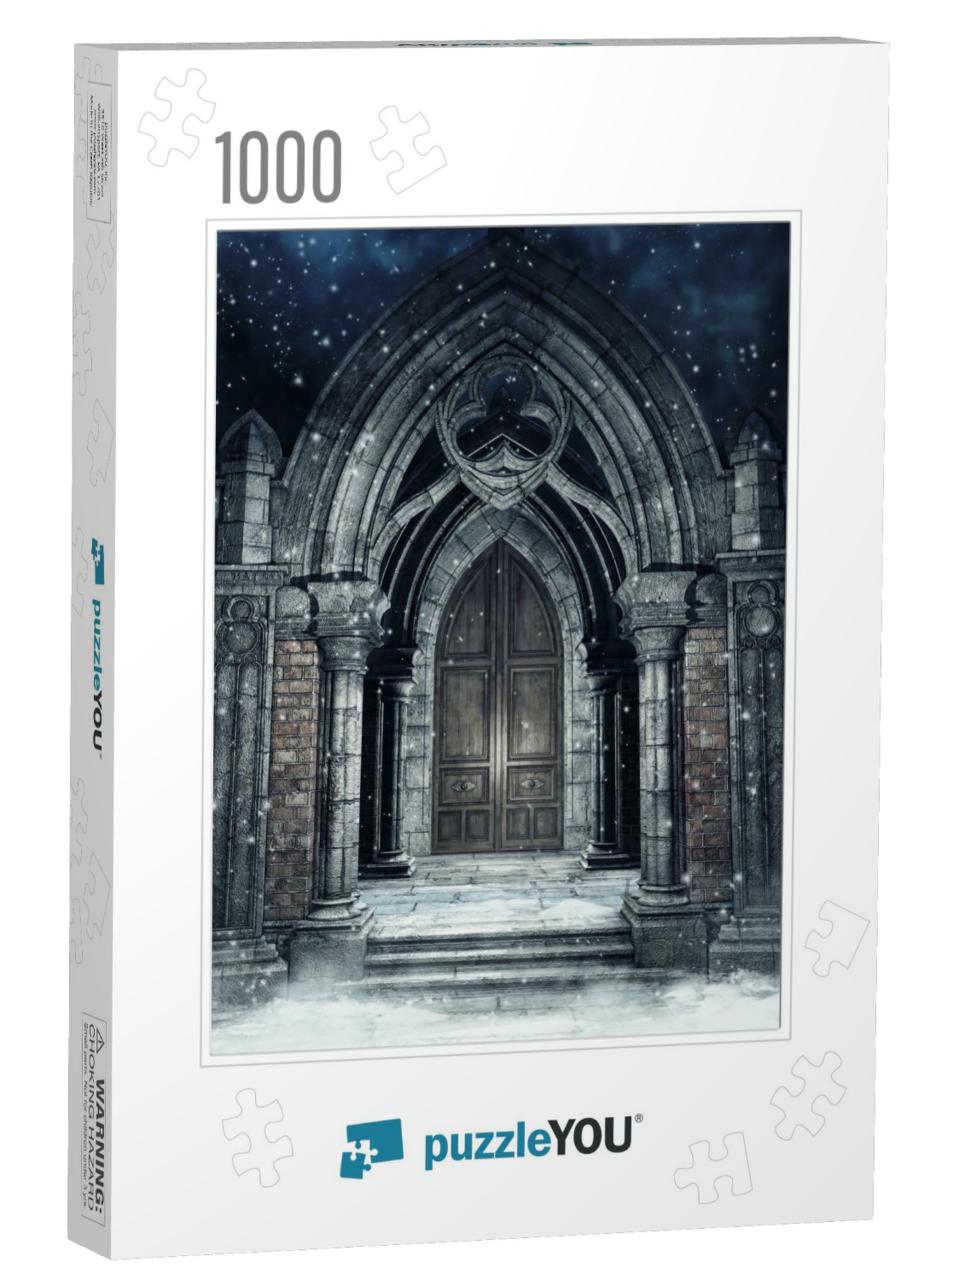 Snowy Scene with a Stone Gothic Gate At Night. 3D Illustr... Jigsaw Puzzle with 1000 pieces